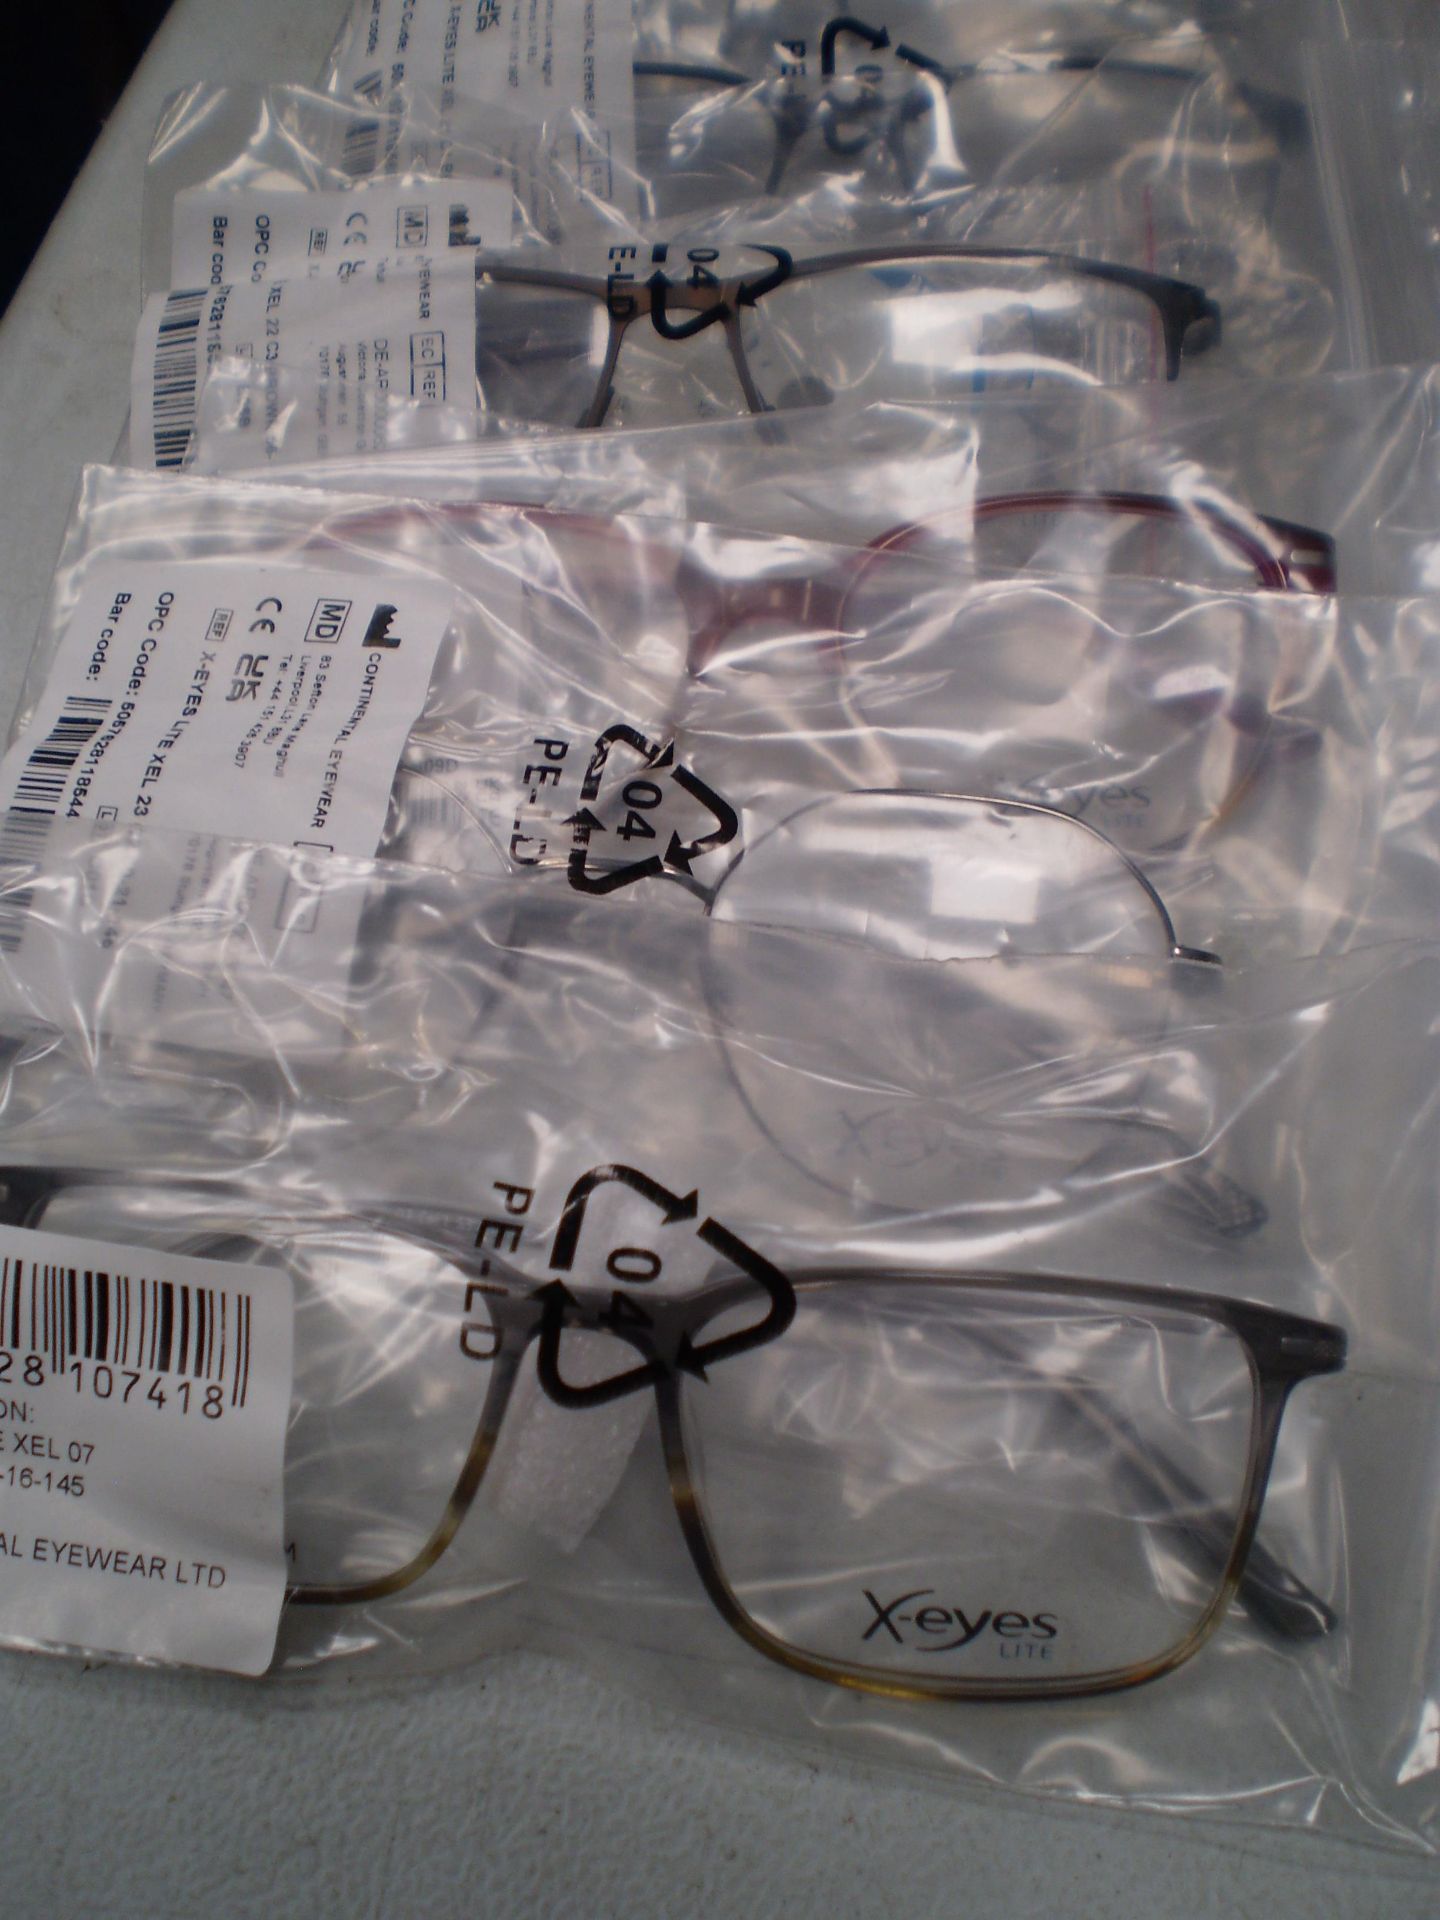 6 x pairs of X-eyes lite spectacle frames and 6 x X-eyes glass cases - sealed new in pack (C13A)